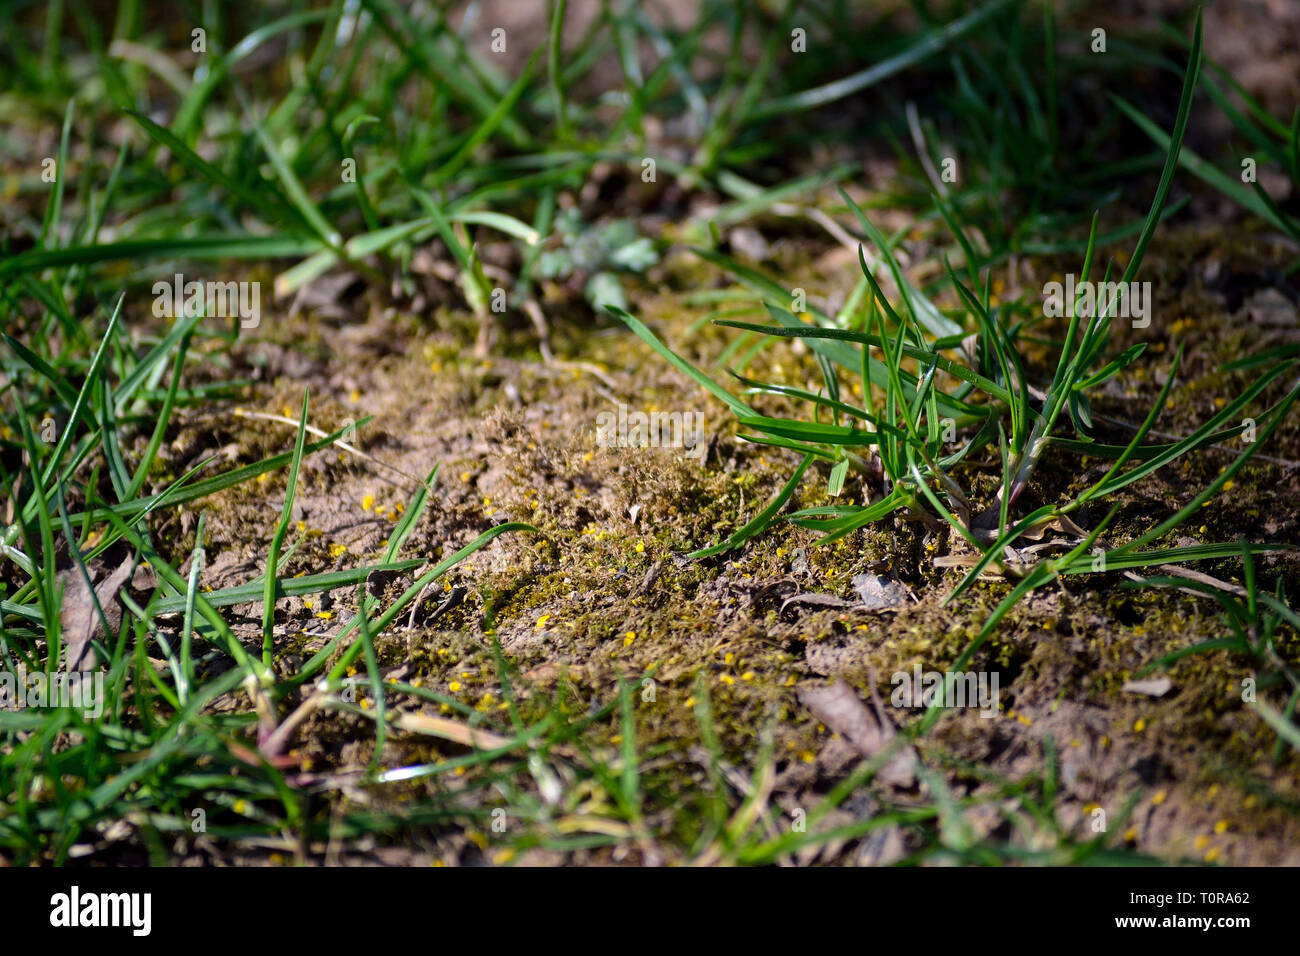 Moss in lawn Stock Photo - Alamy